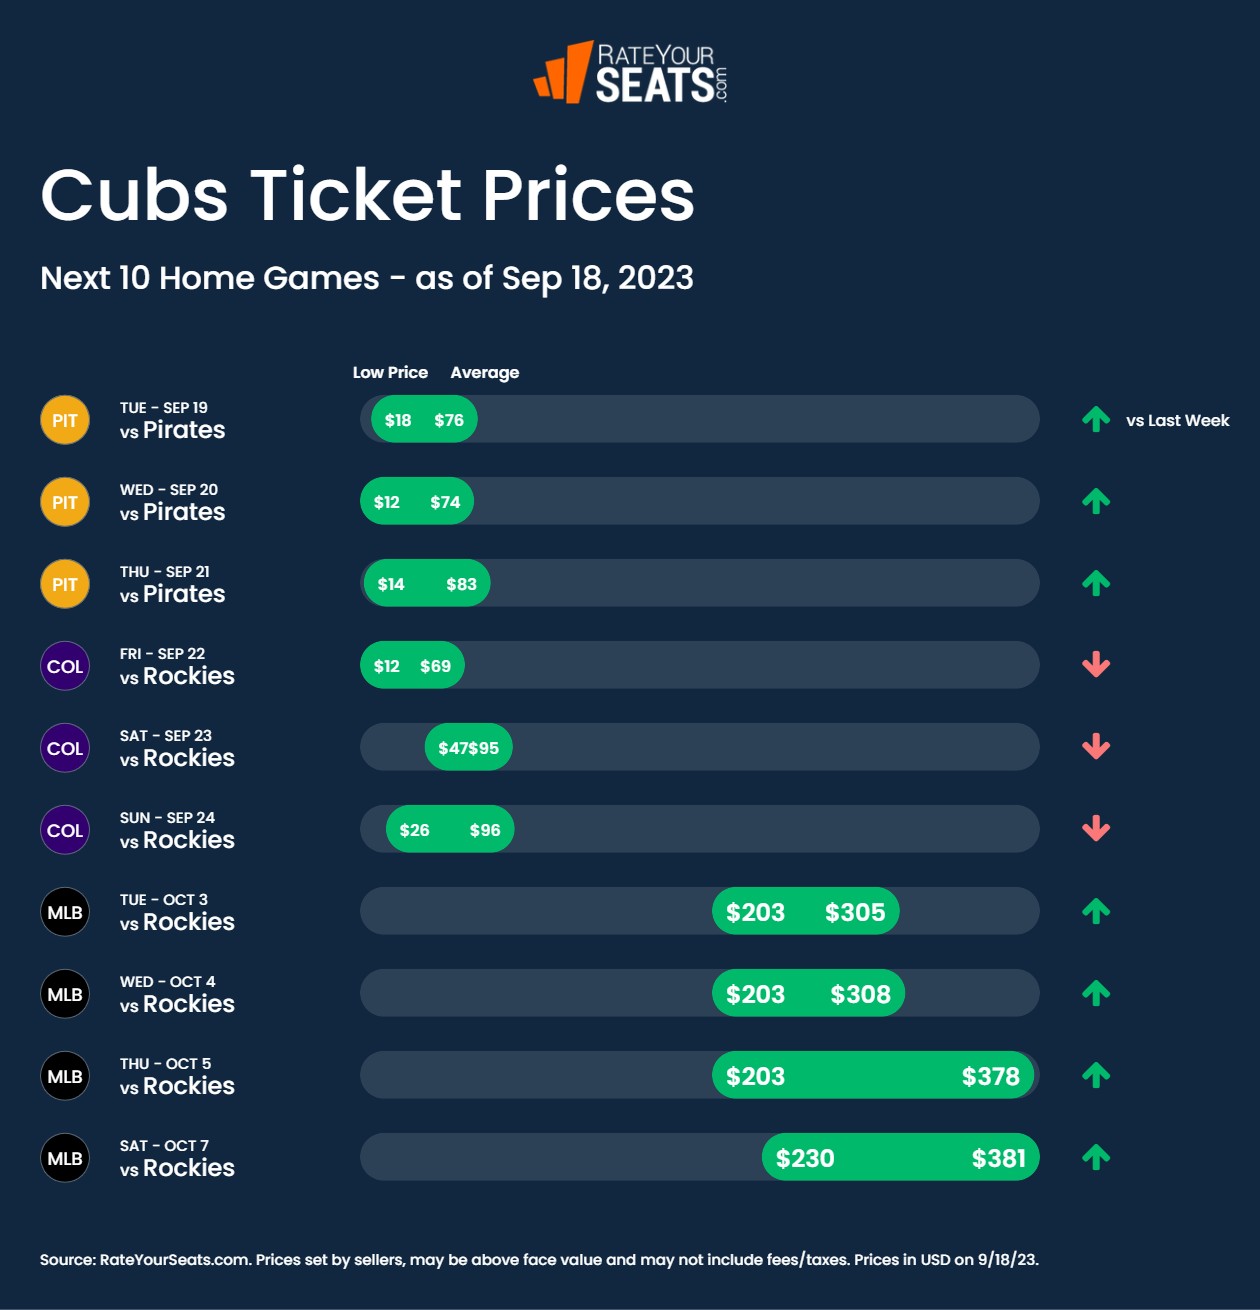 Cubs tickets pricing week of September 18 2023